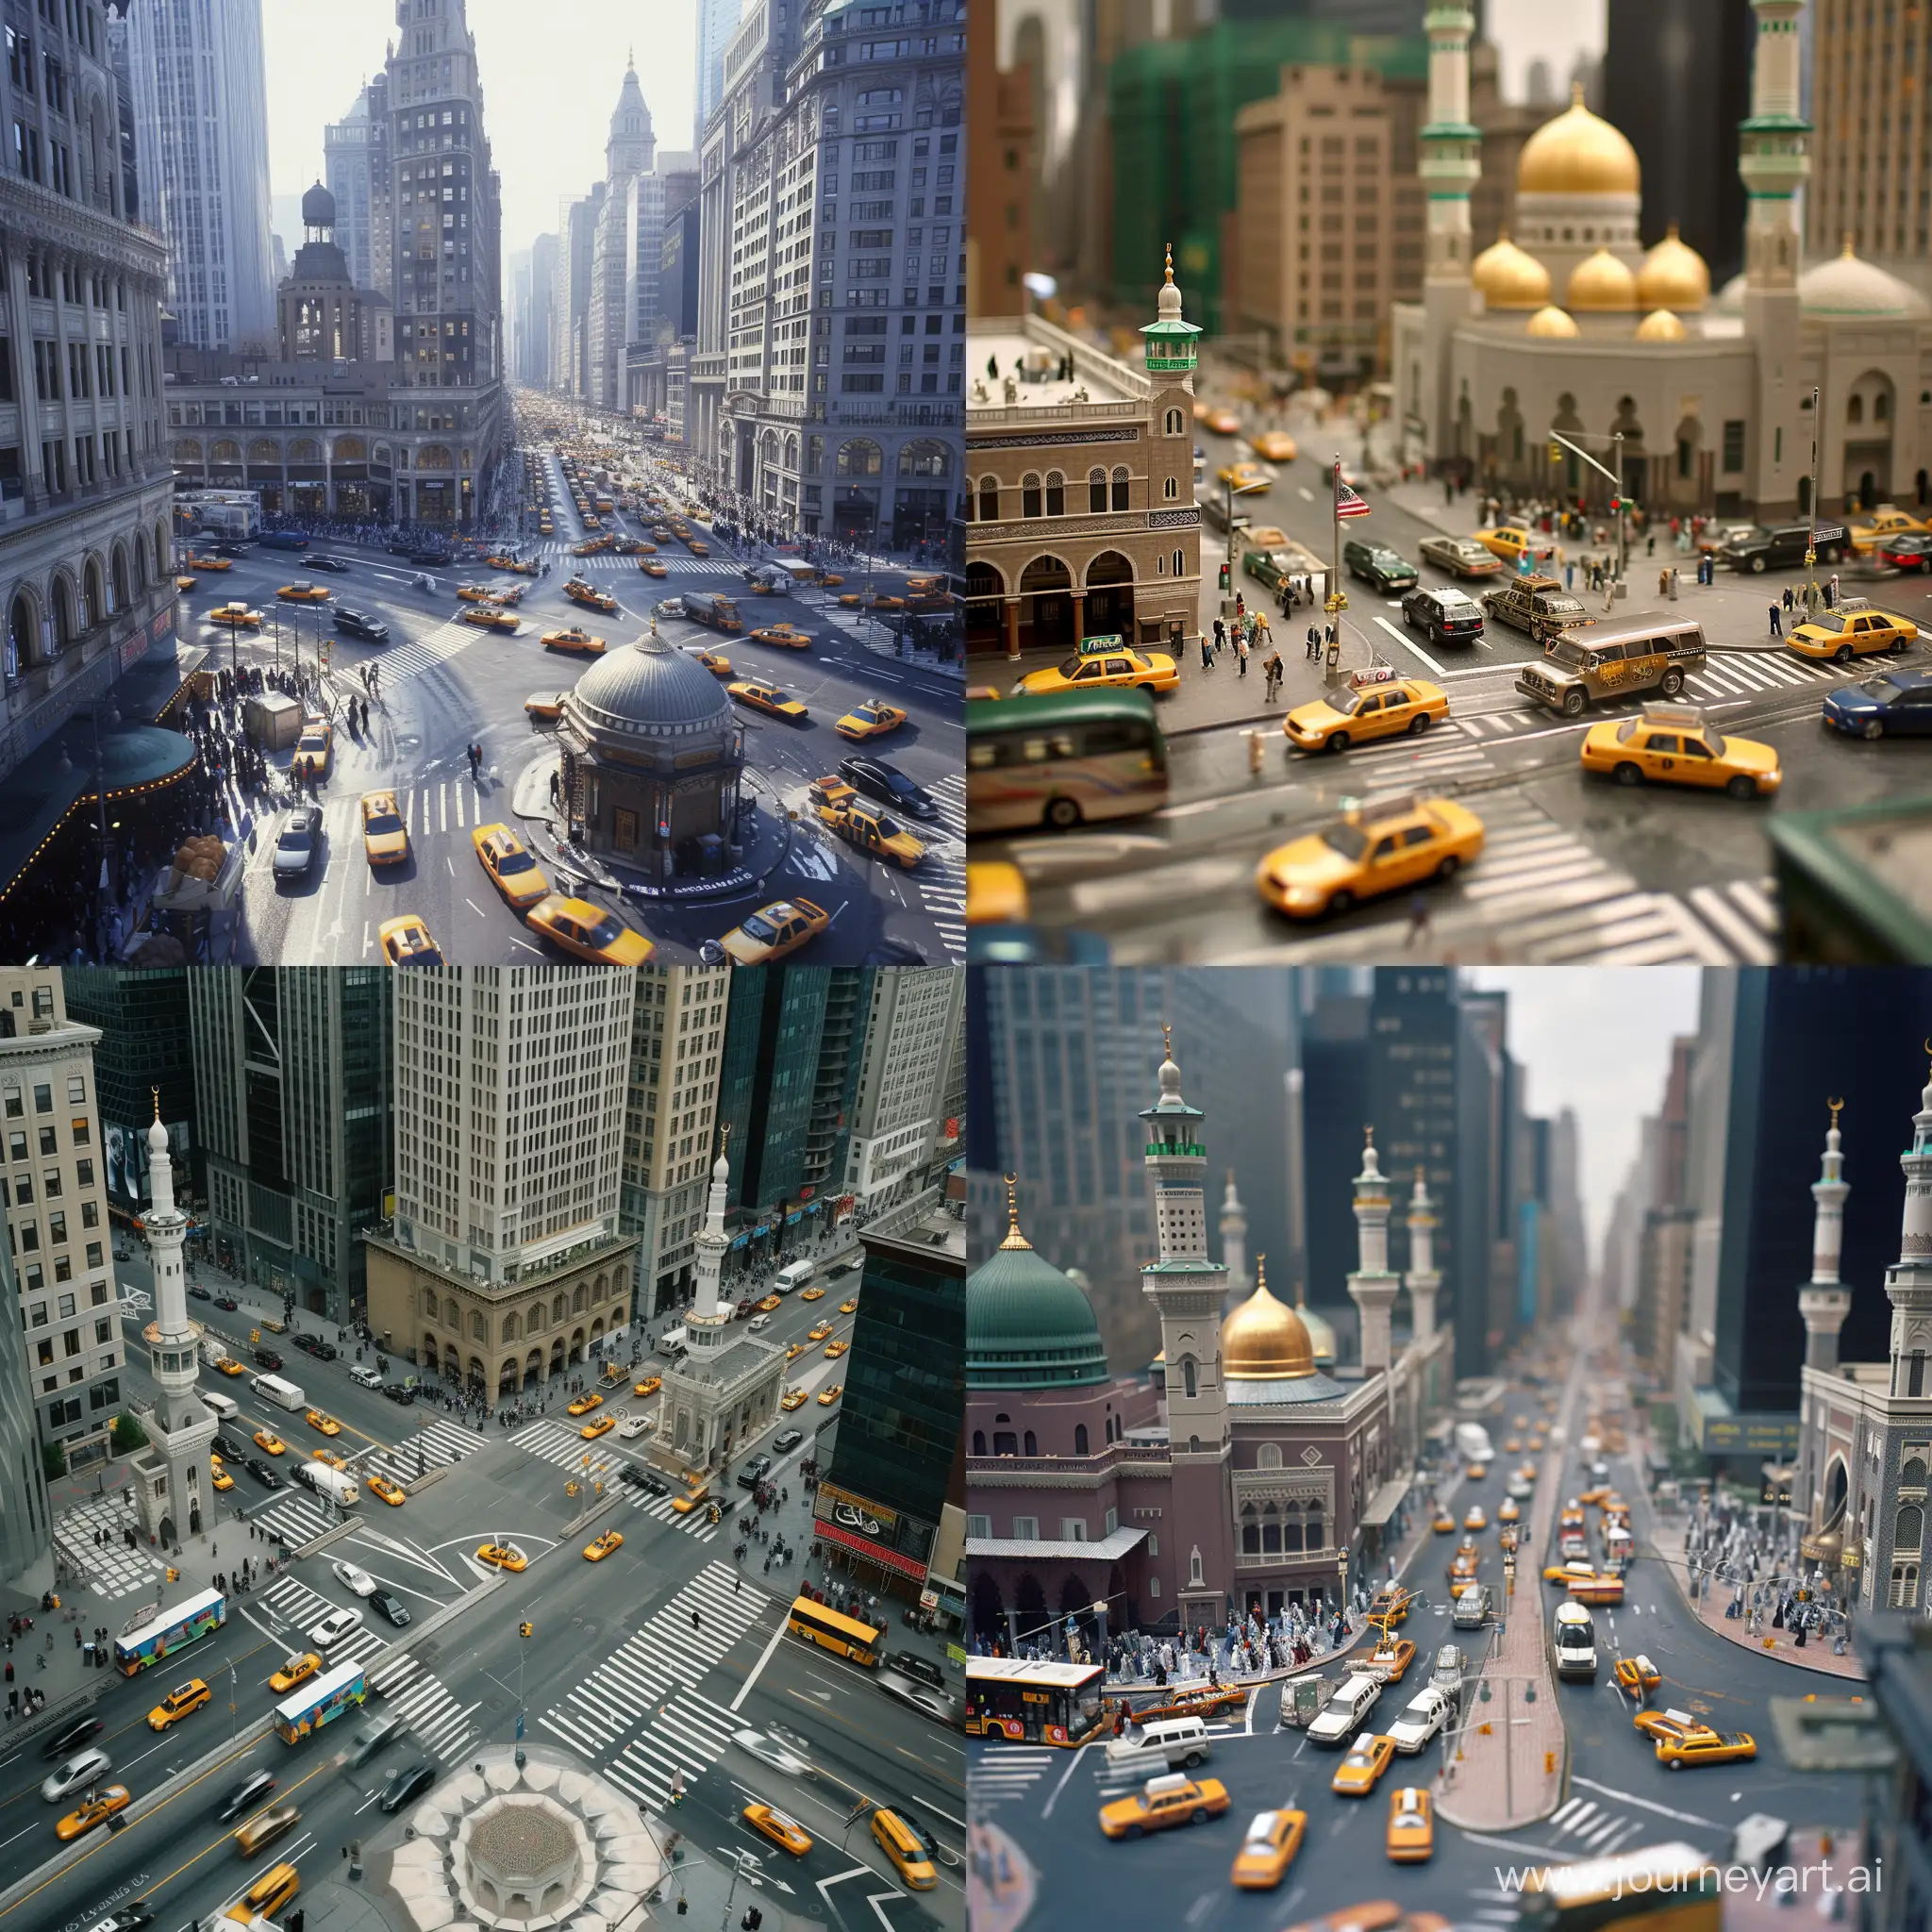 Busy-New-York-Street-Intersection-with-Mecca-Mosque-Architecture